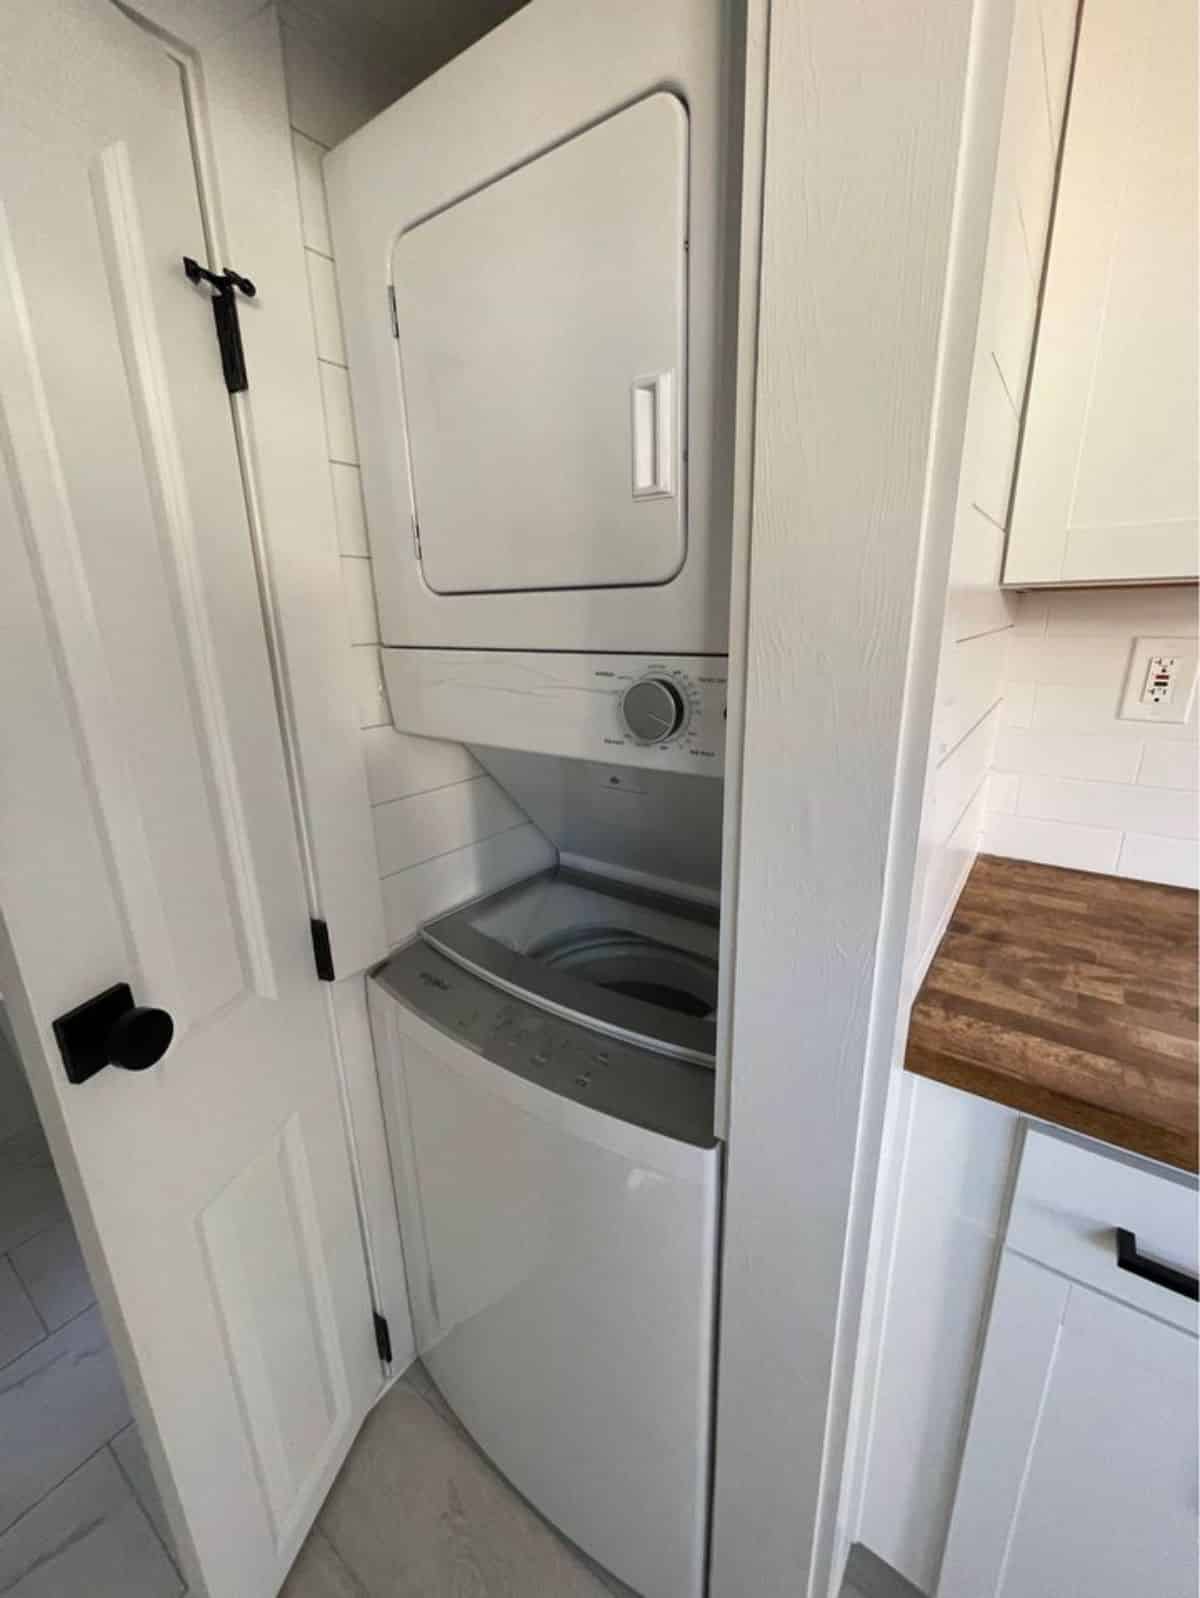 Washer dryer combo is also included in Certified Tiny House on Wheels